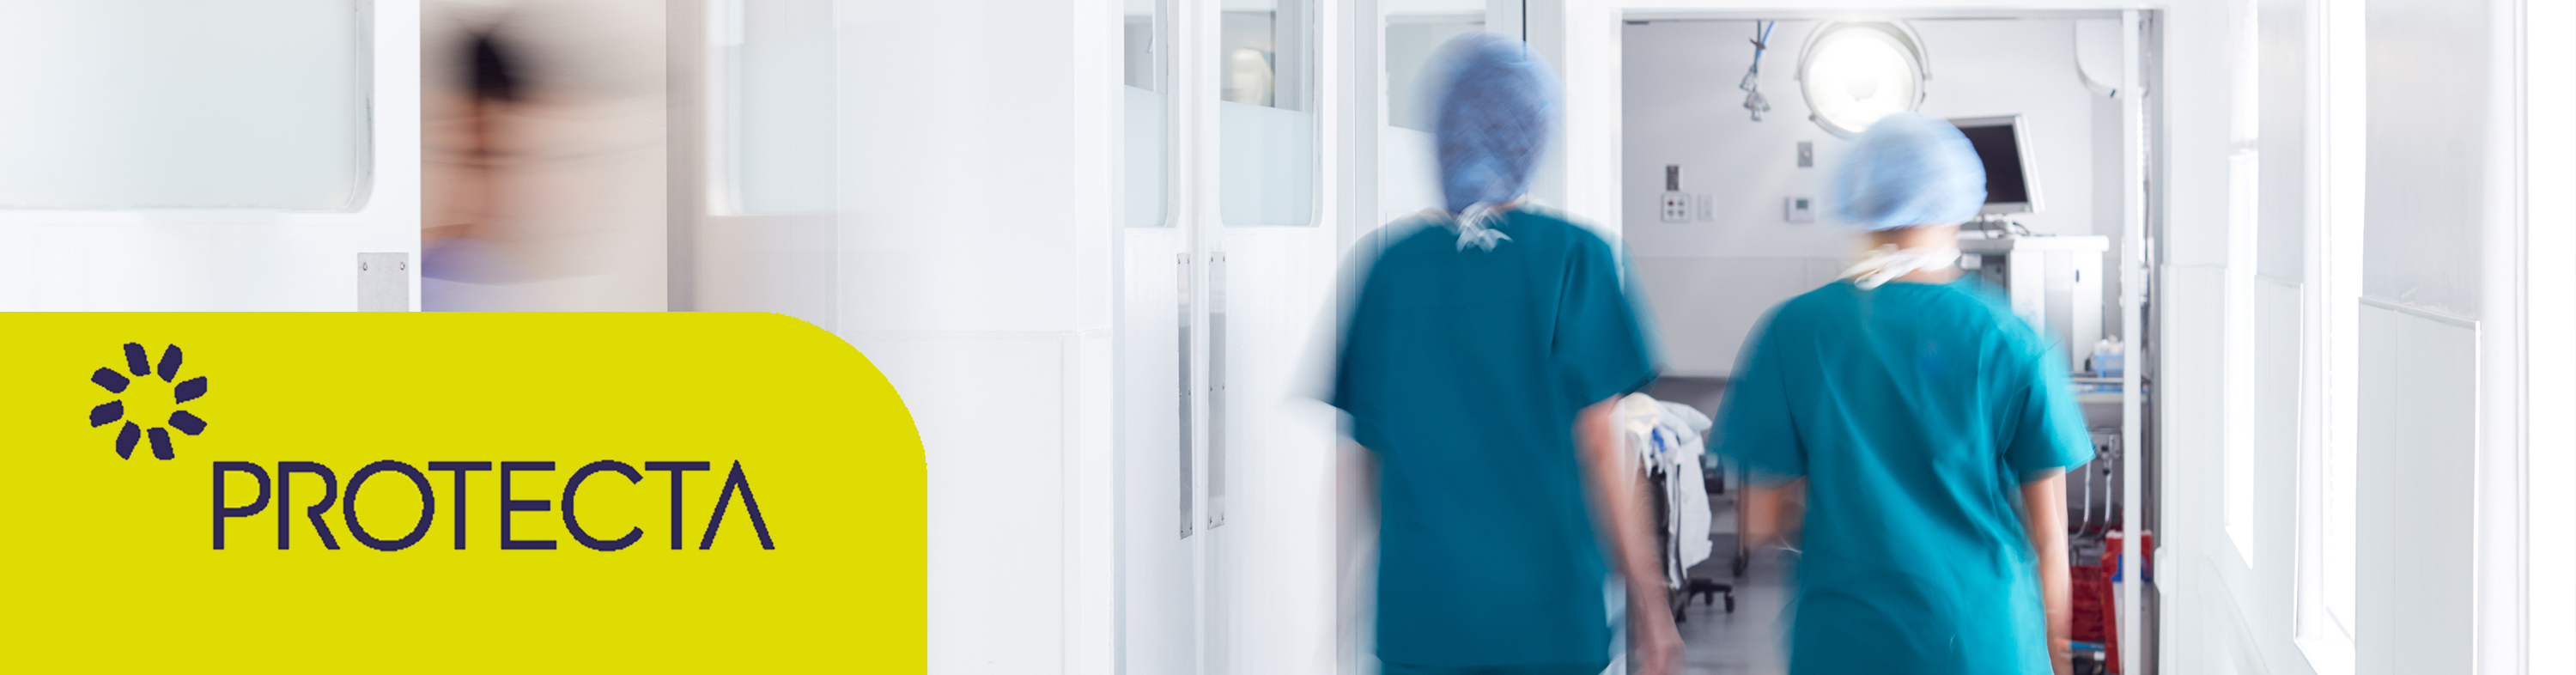 infection prevention in hospitals